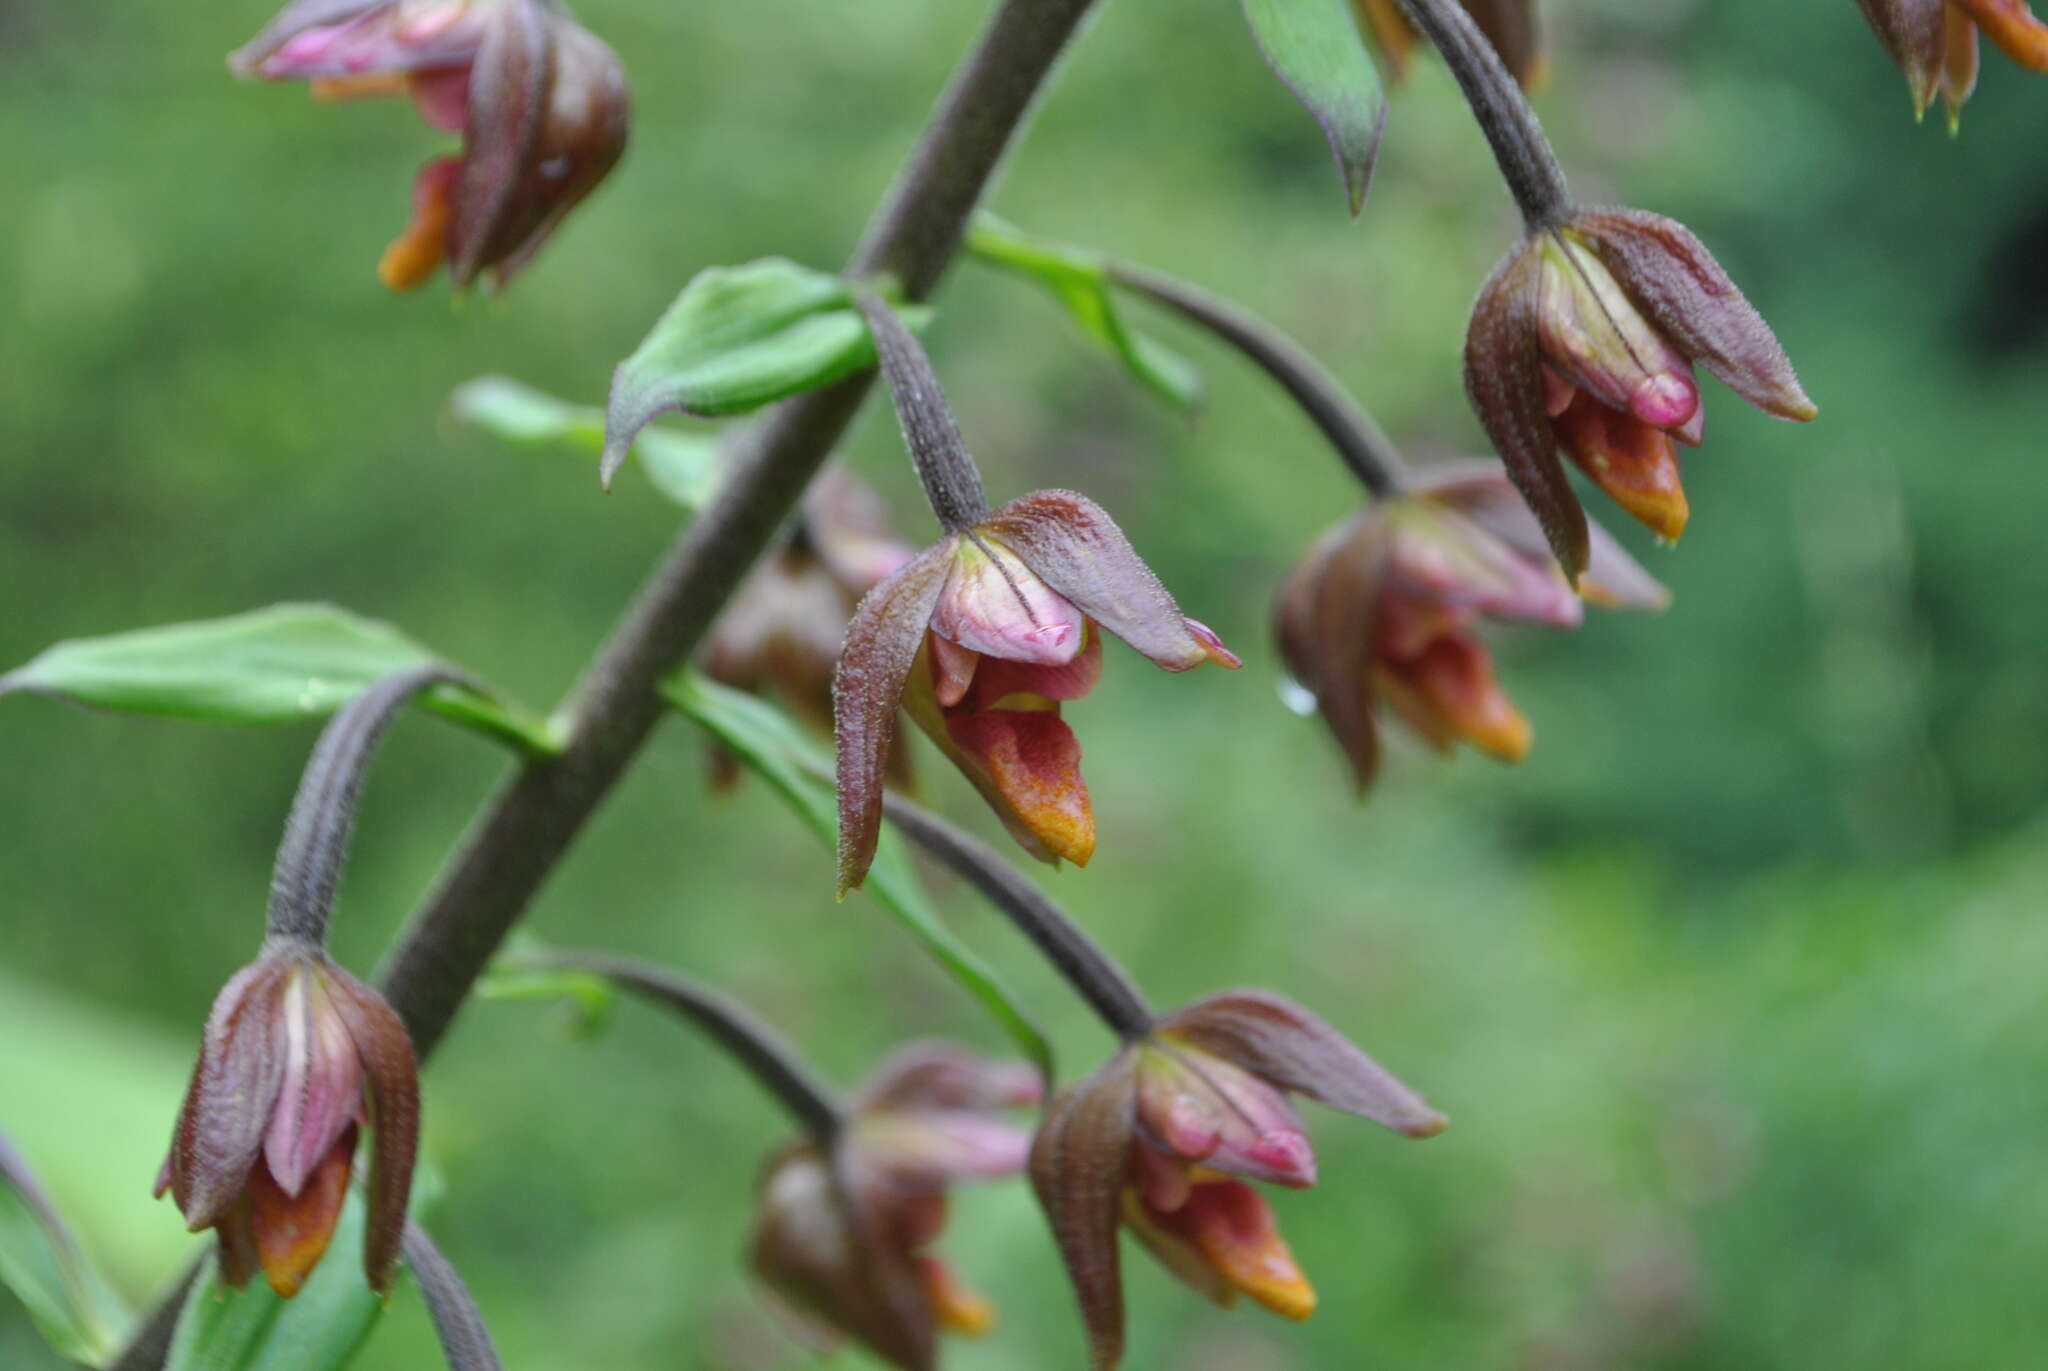 Image of Epipactis mairei Schltr.